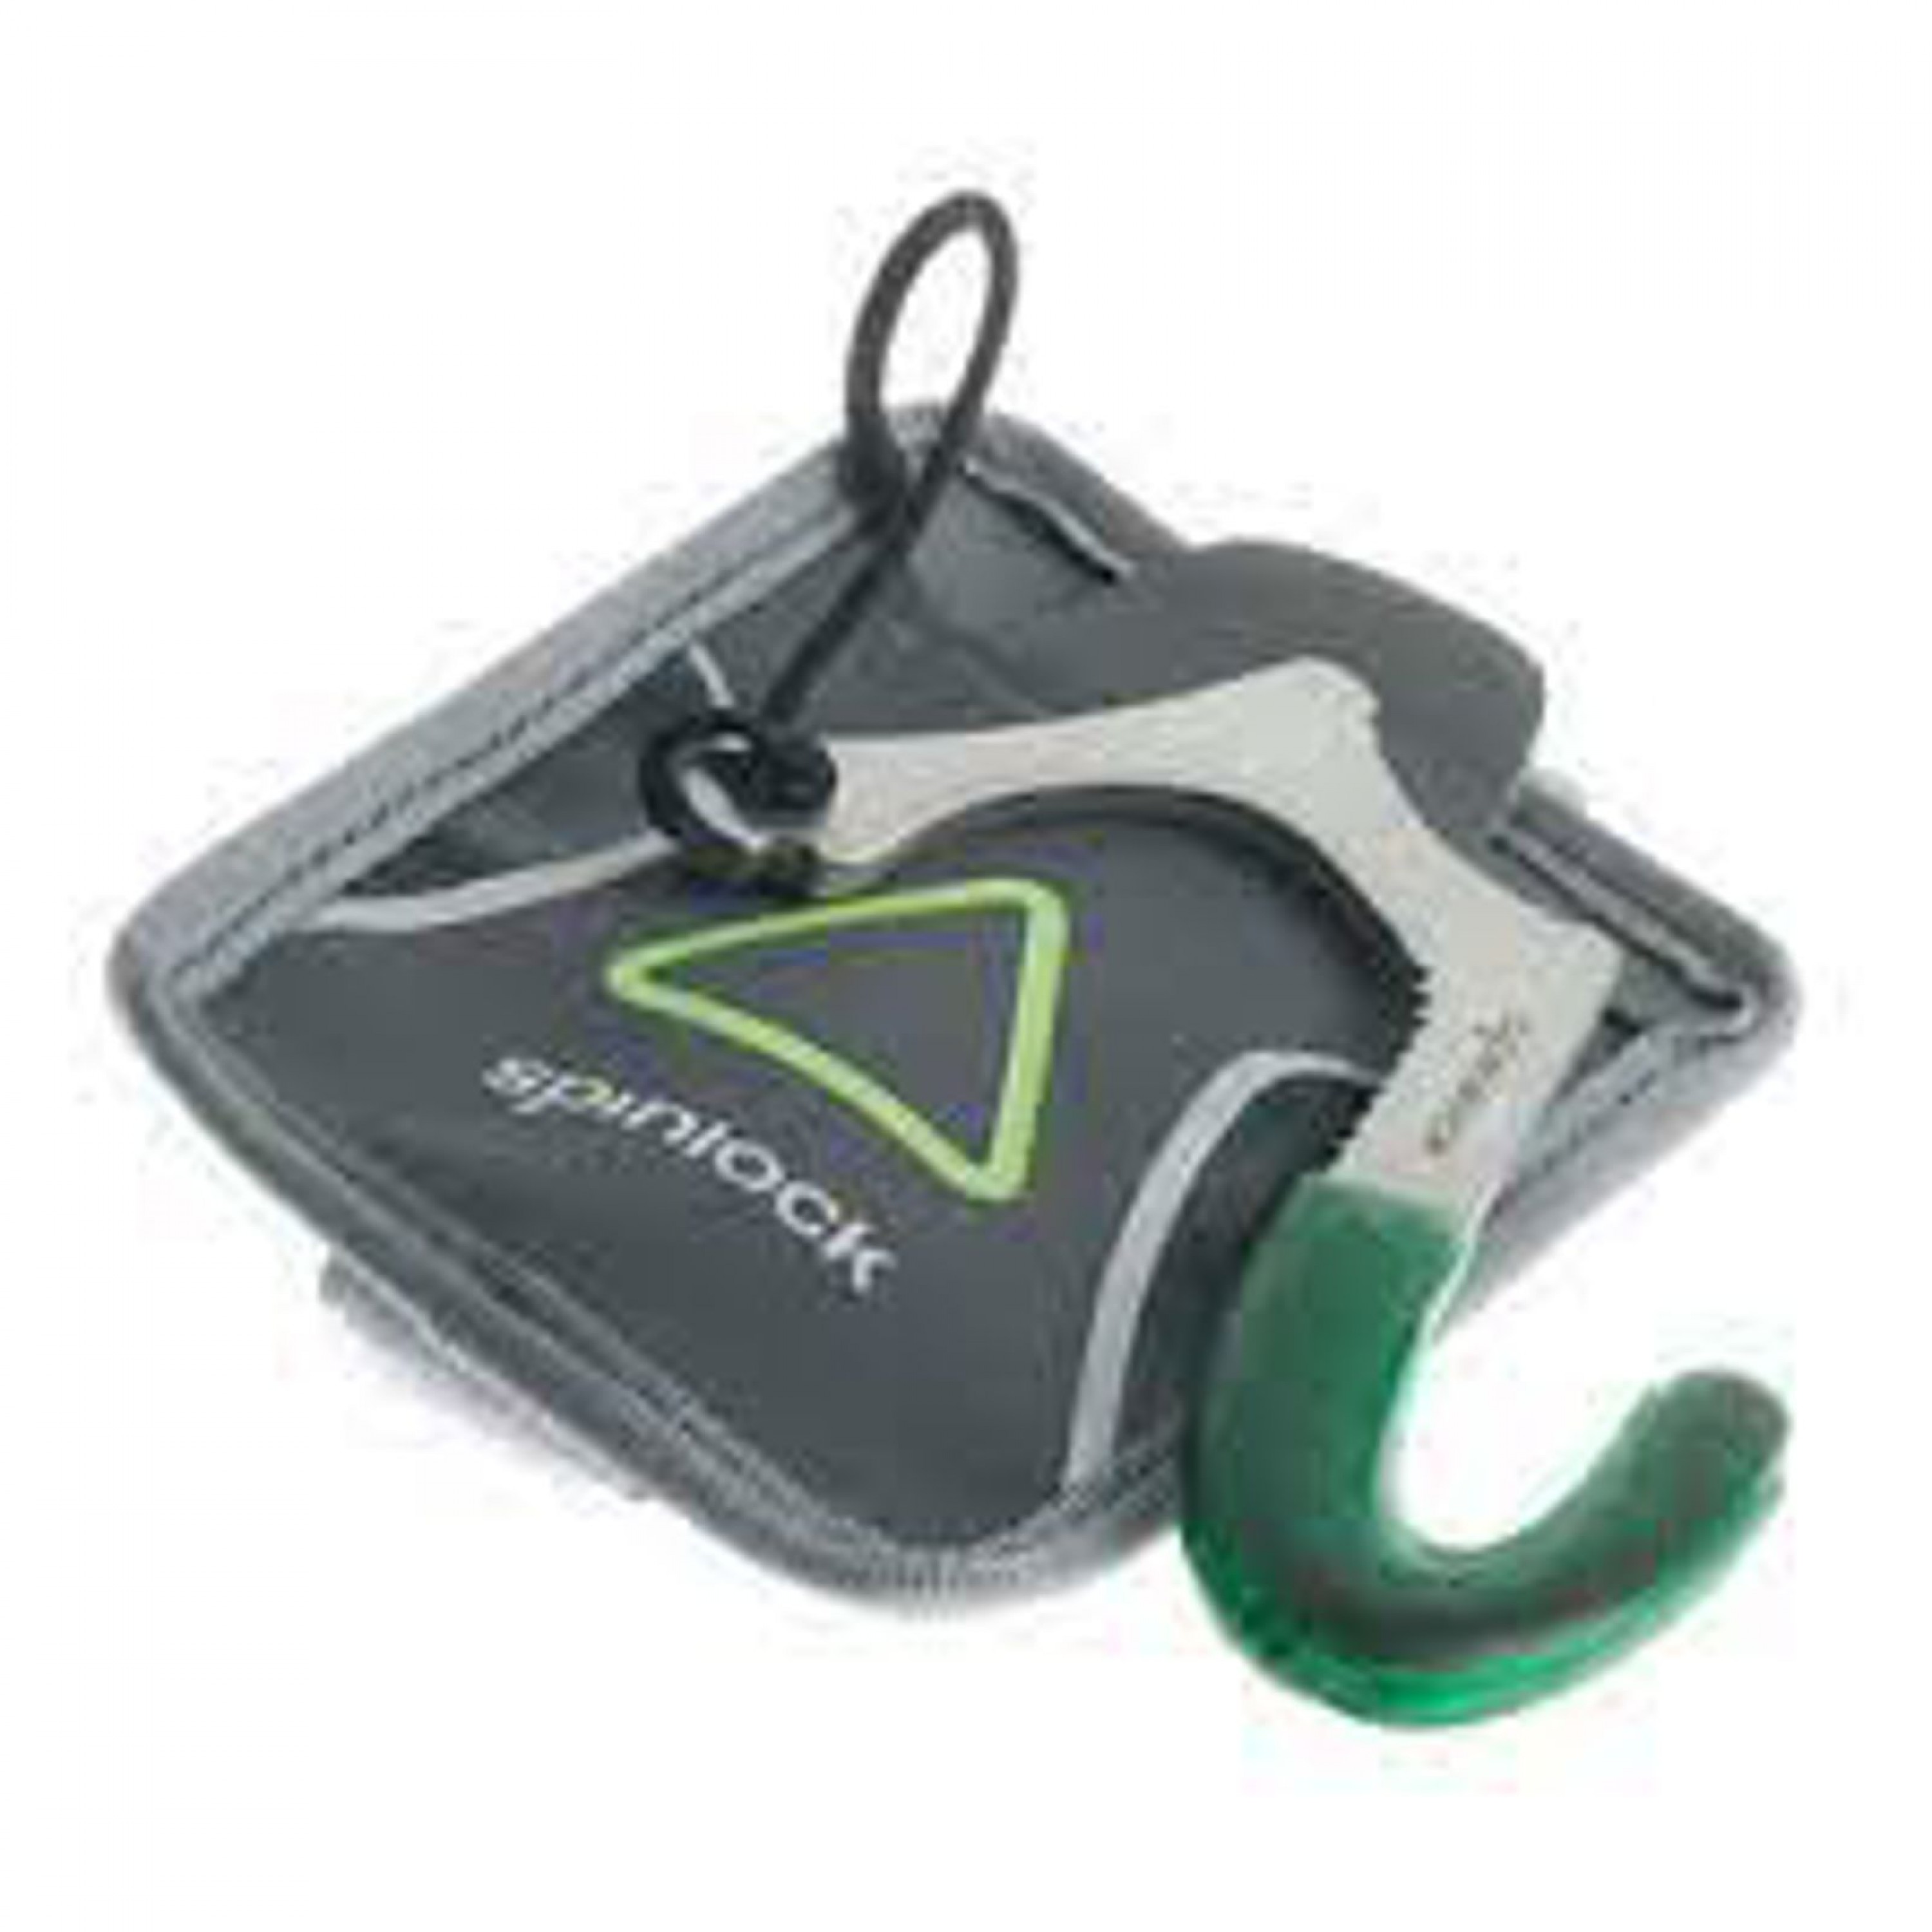 SPINLOCK CUTTER AND POUCH